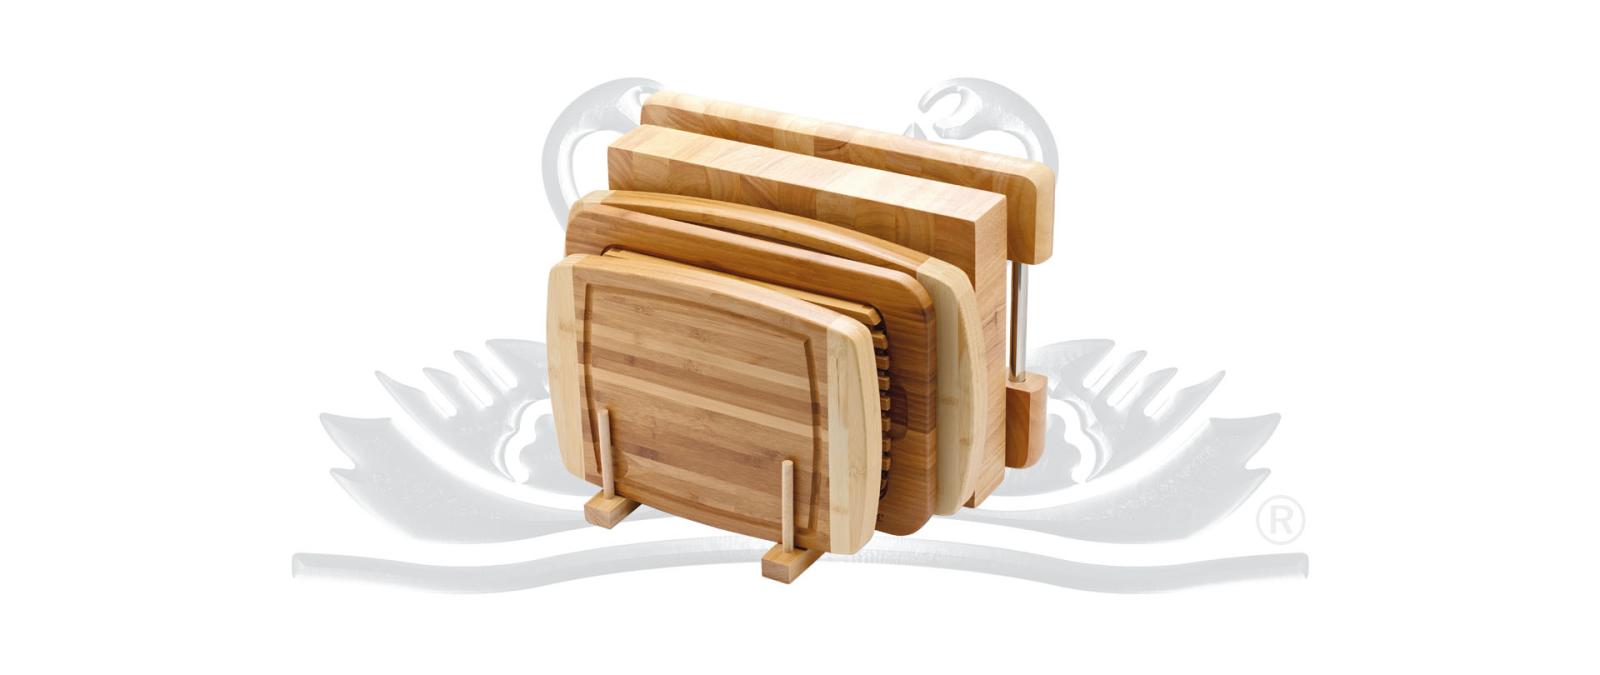 Wooden holder for 5 cutting boards